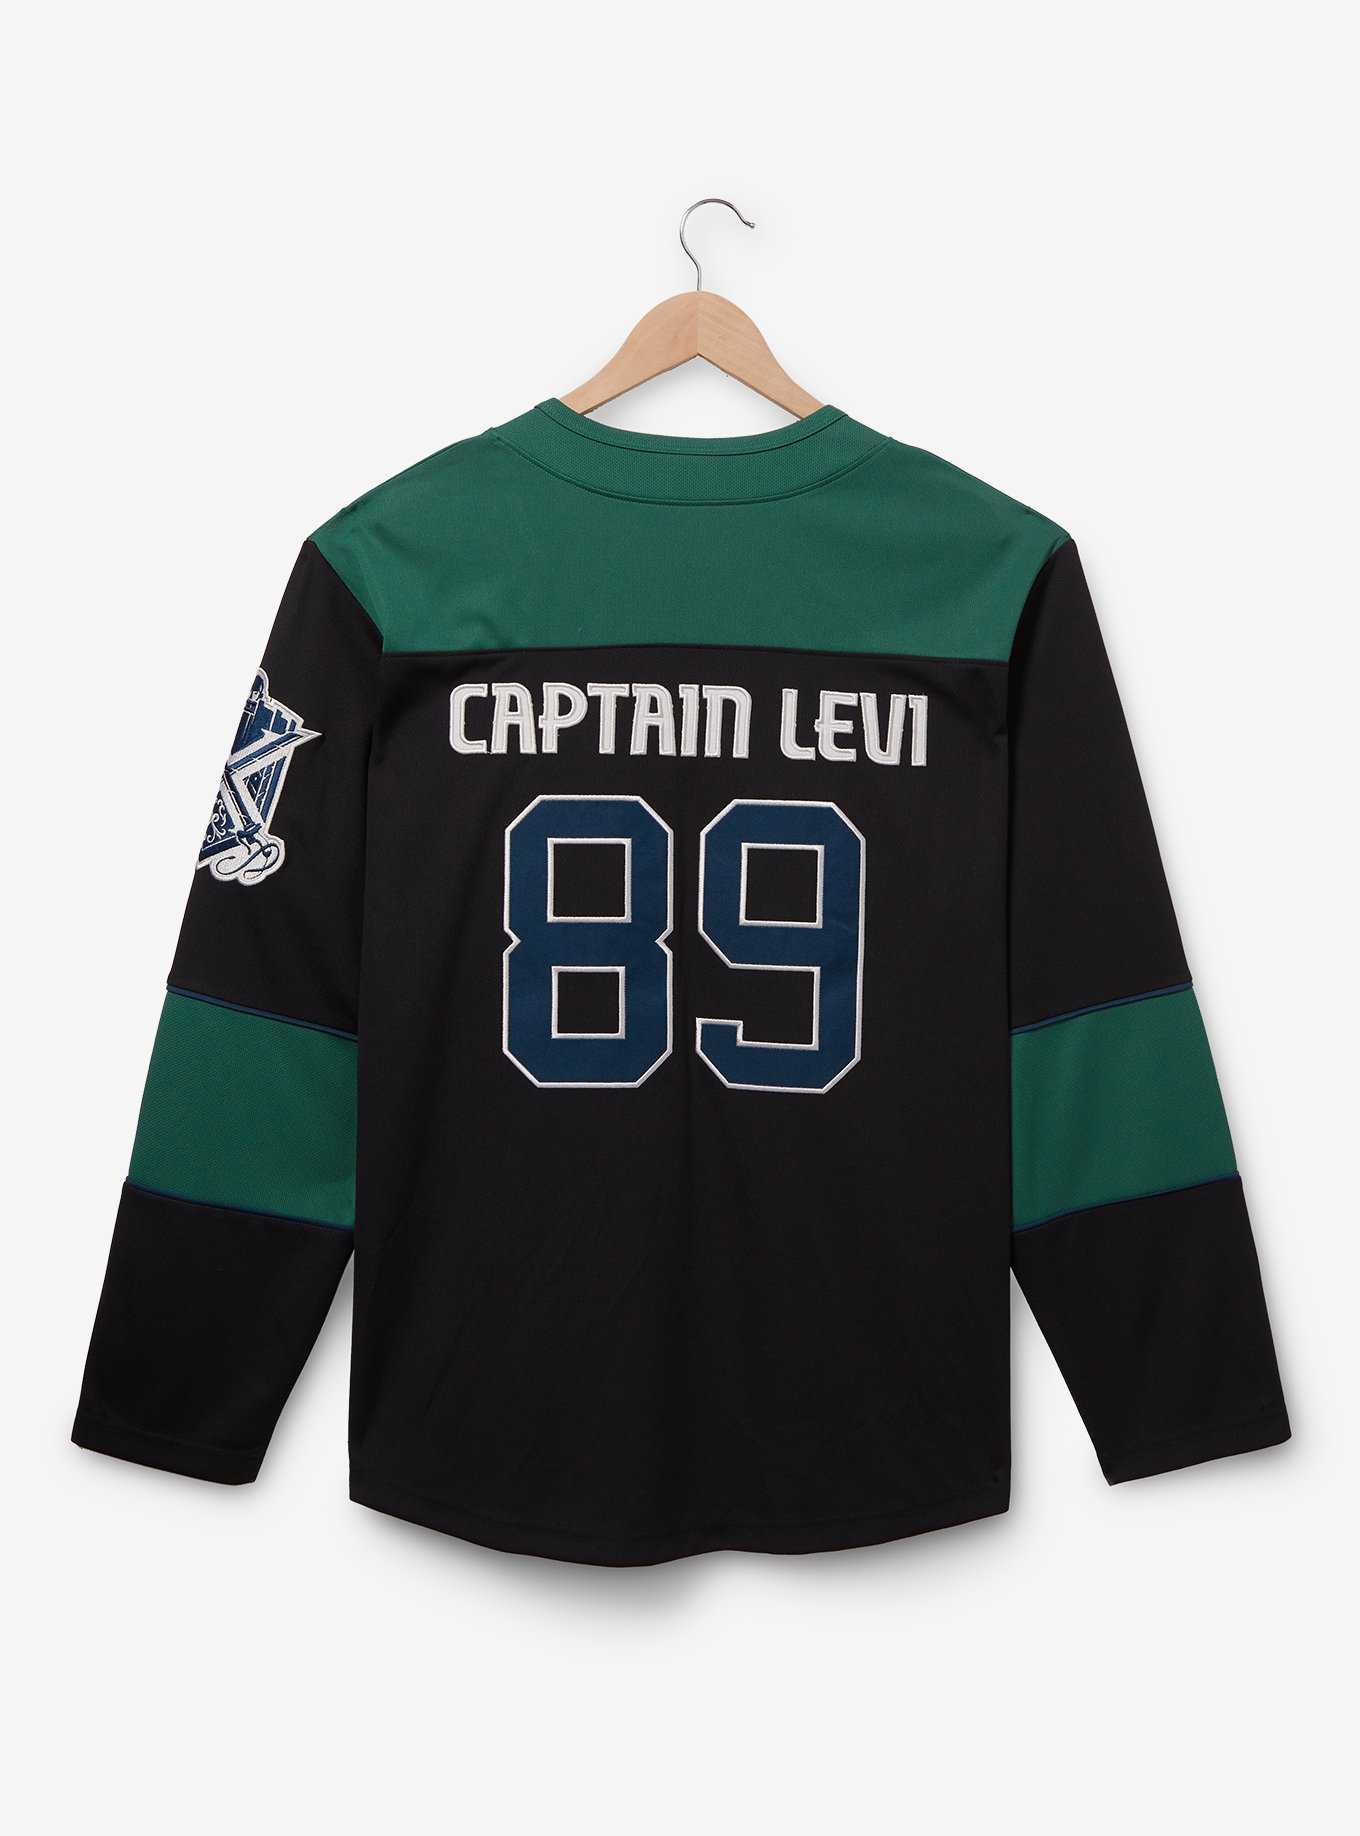 Attack on Titan Captain Levi Hockey Jersey - BoxLunch Exclusive, , hi-res